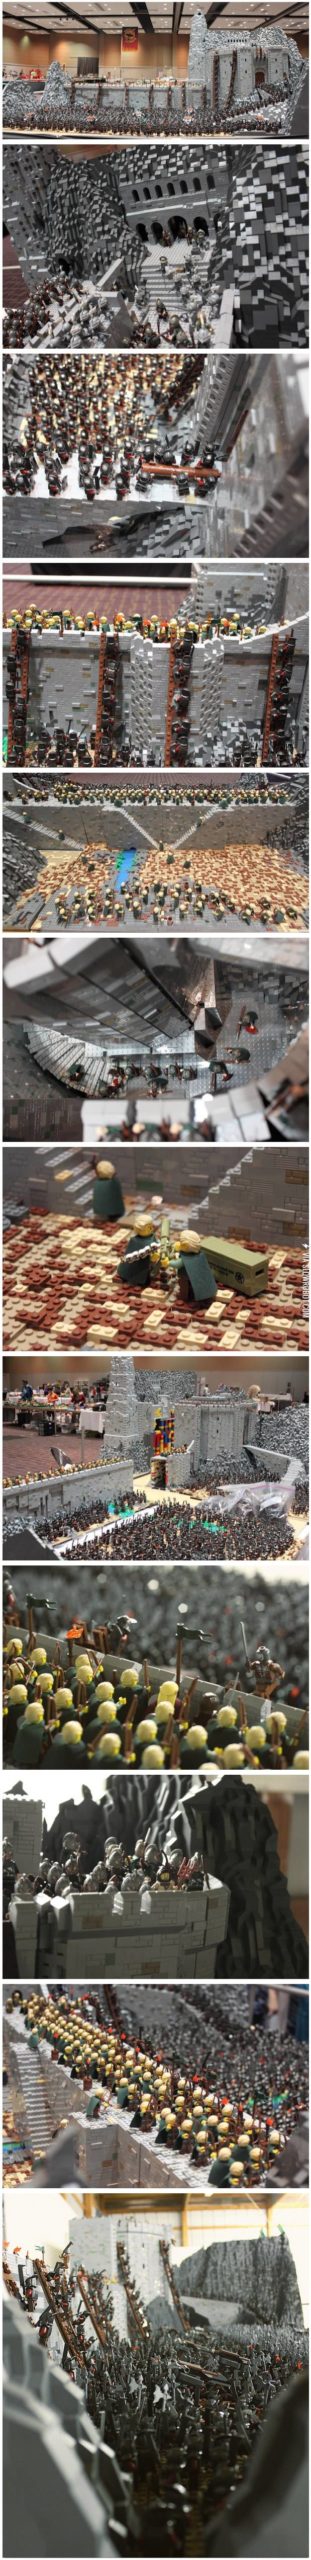 Helms+Deep+recreated+in+lego.+150%2C000+bricks%2C+1%2C700+figures+and+four+months